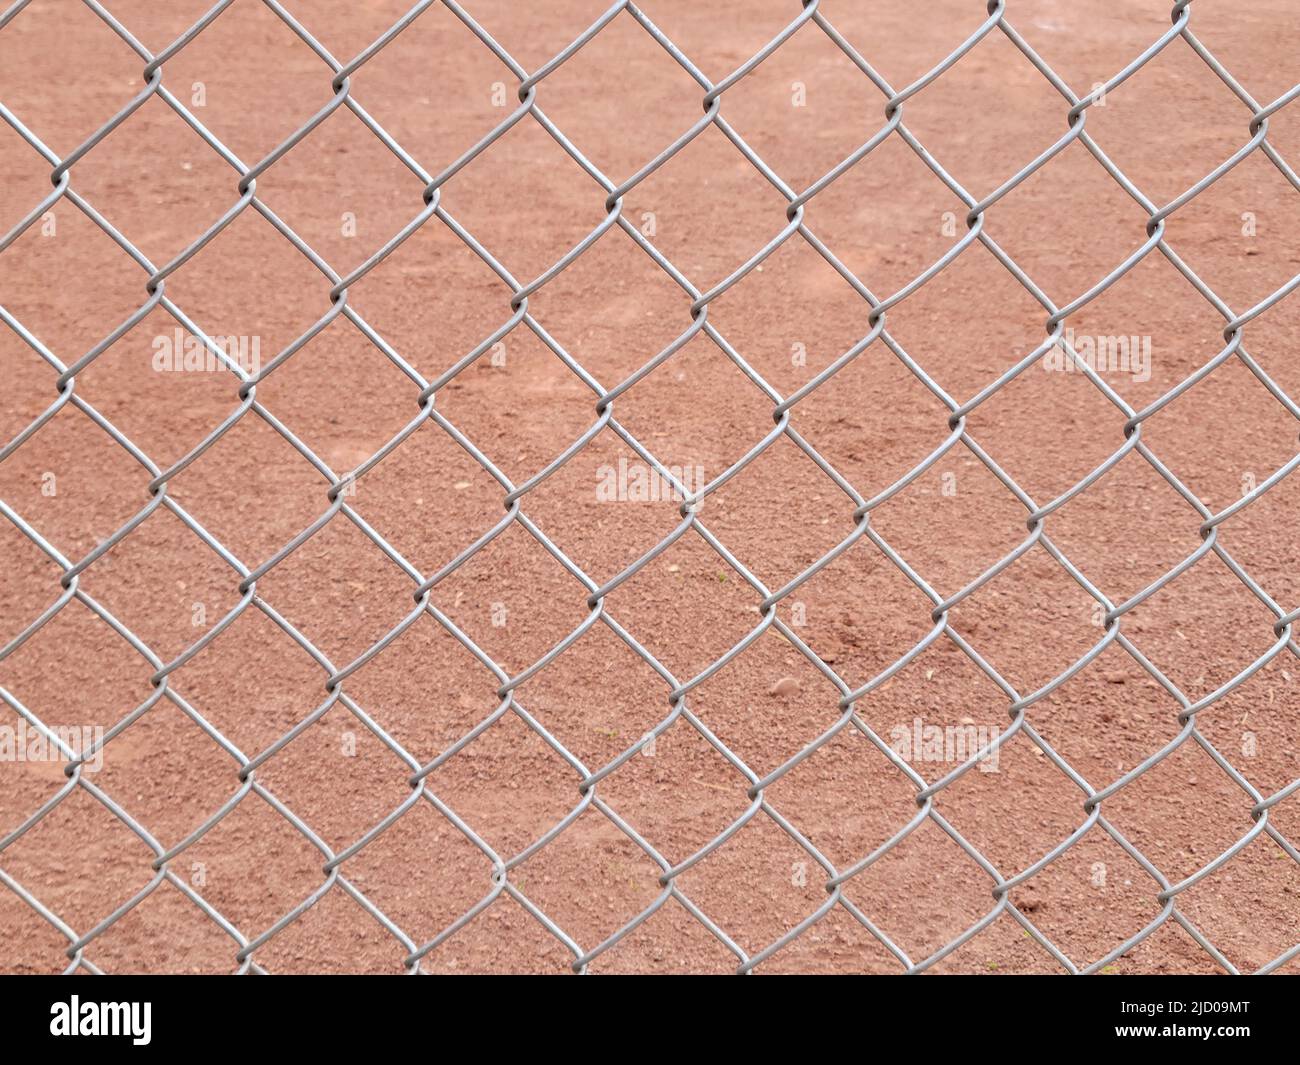 Close up of a chain-link fence with light brown dirt background Stock Photo